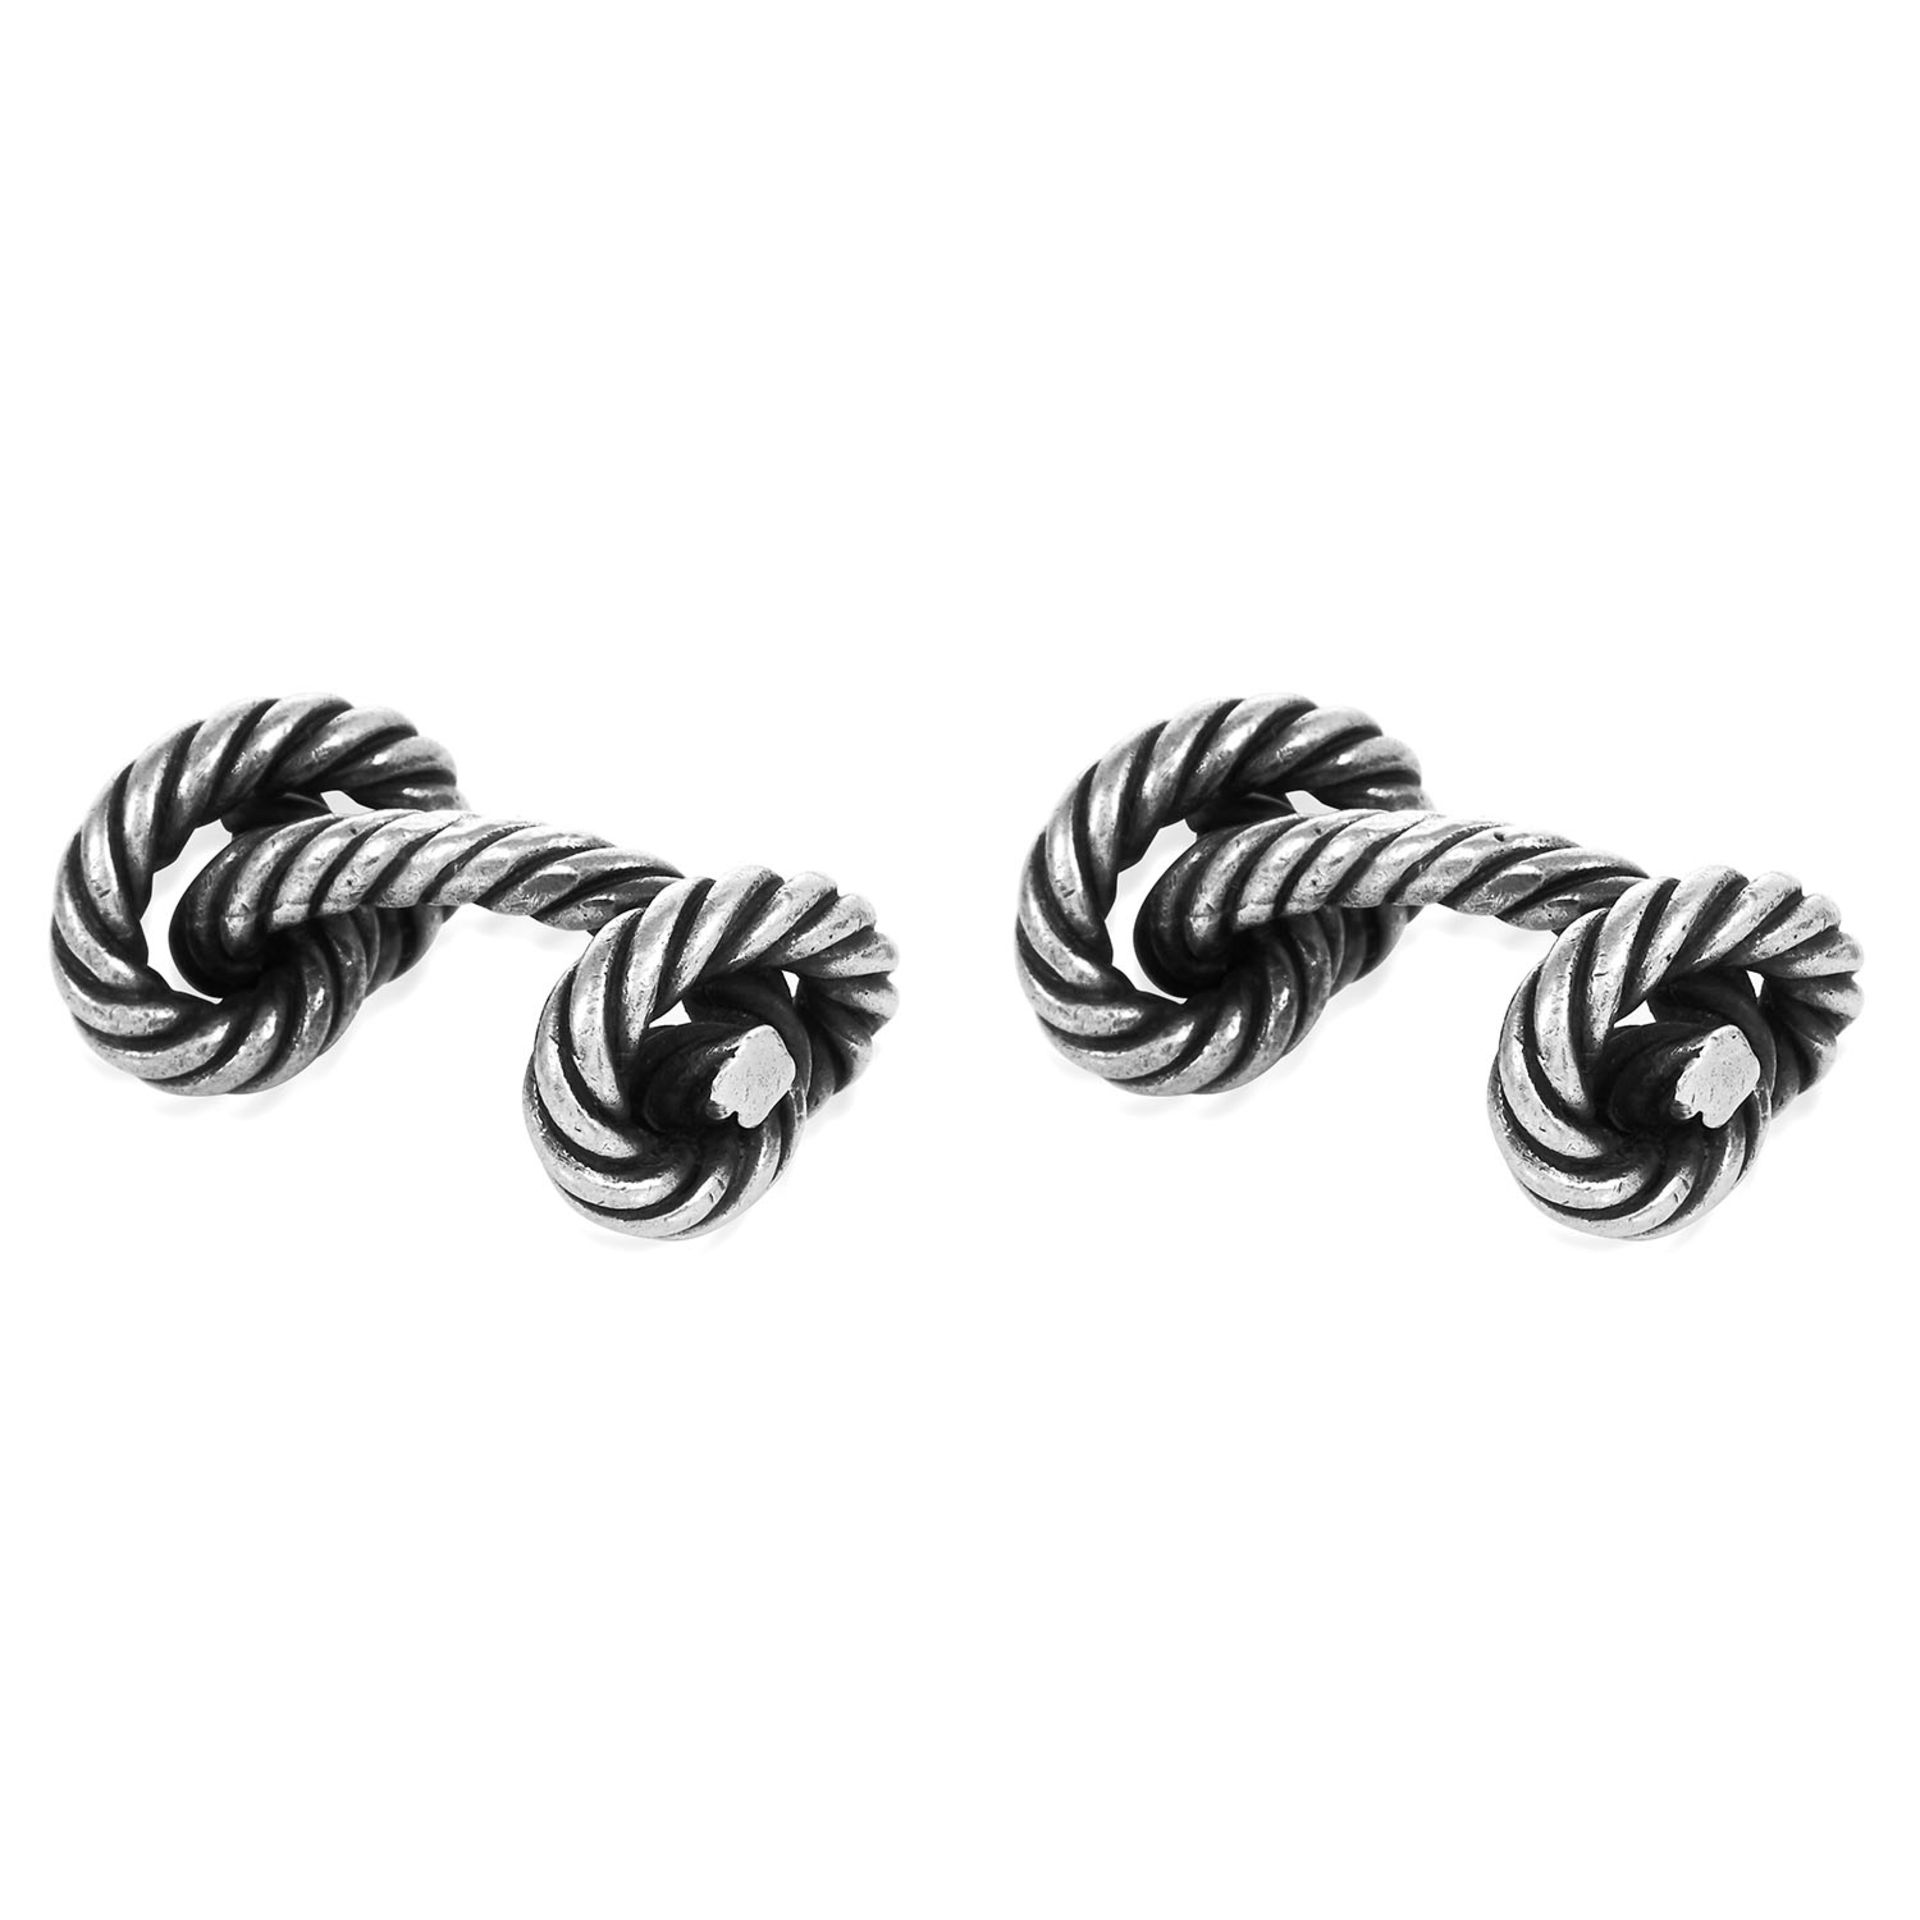 A PAIR OF KNOTTED ROPE CUFFLINKS, HERMES in silver, designed as knotted rope, signed Hermes,